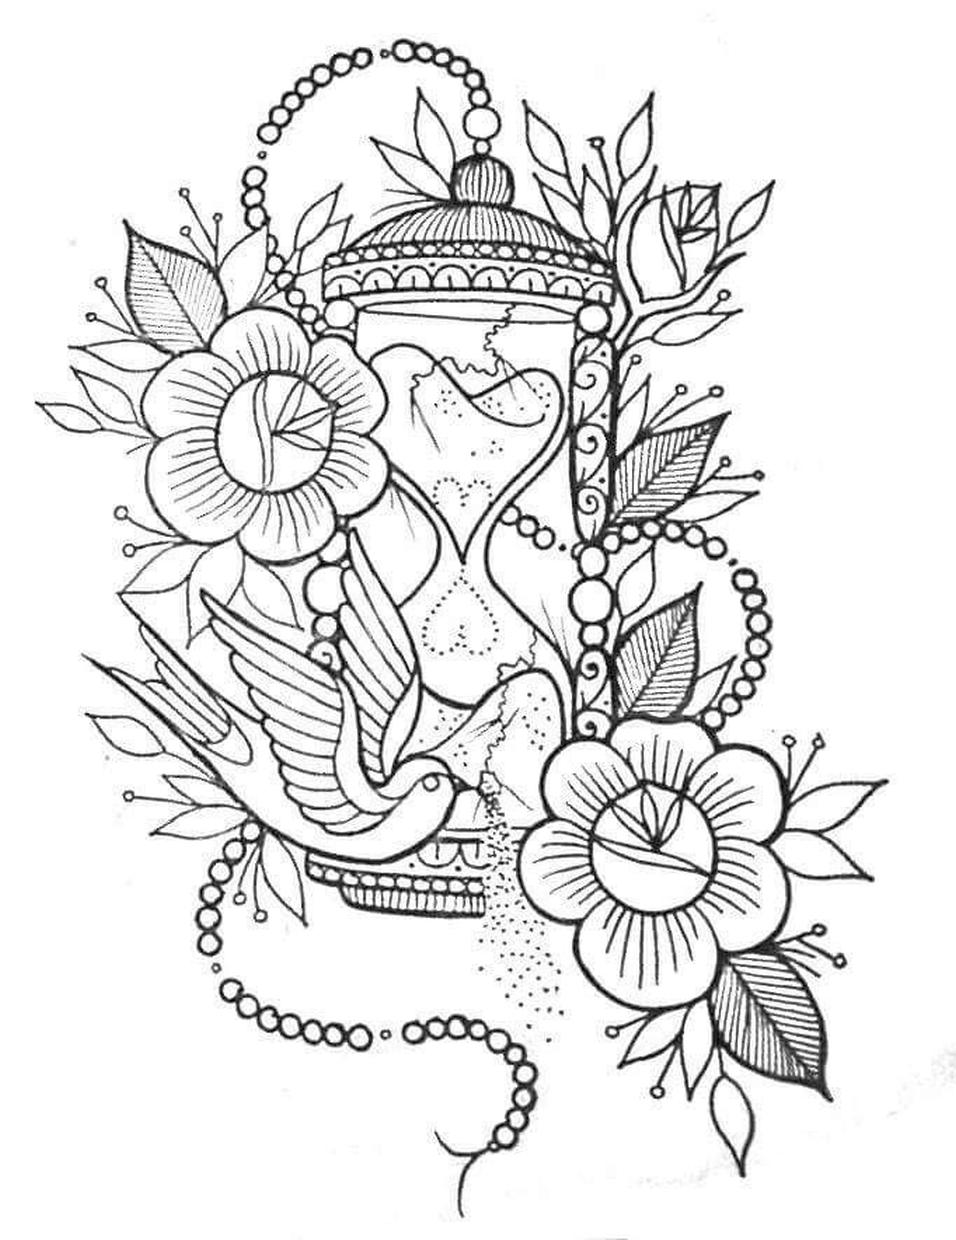 Adult Coloring Pages Tattoo Ladies Coloring Pages